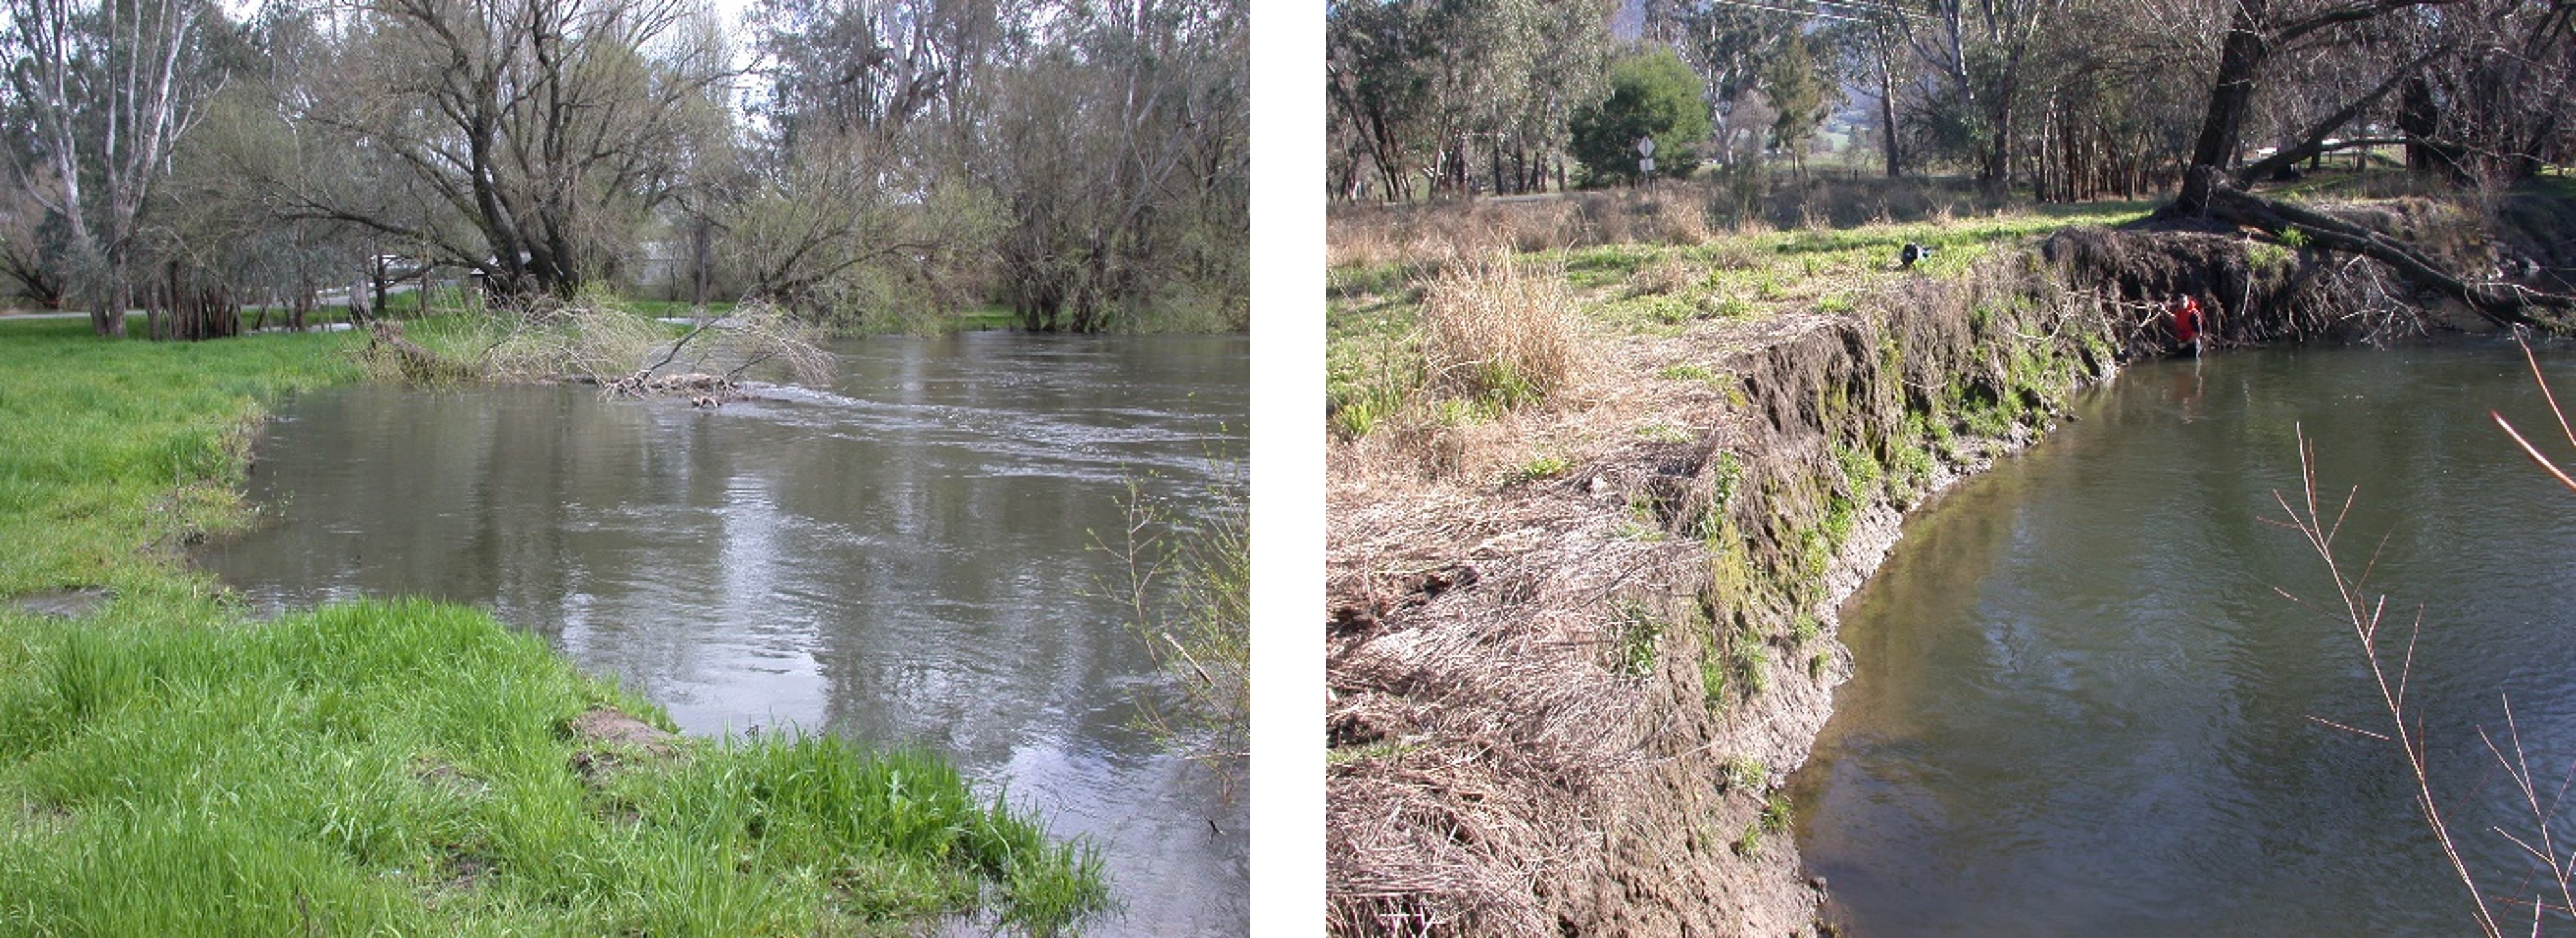 The Kiewa River in Victoria at bankfull flow and low flow. Photos by James Grove